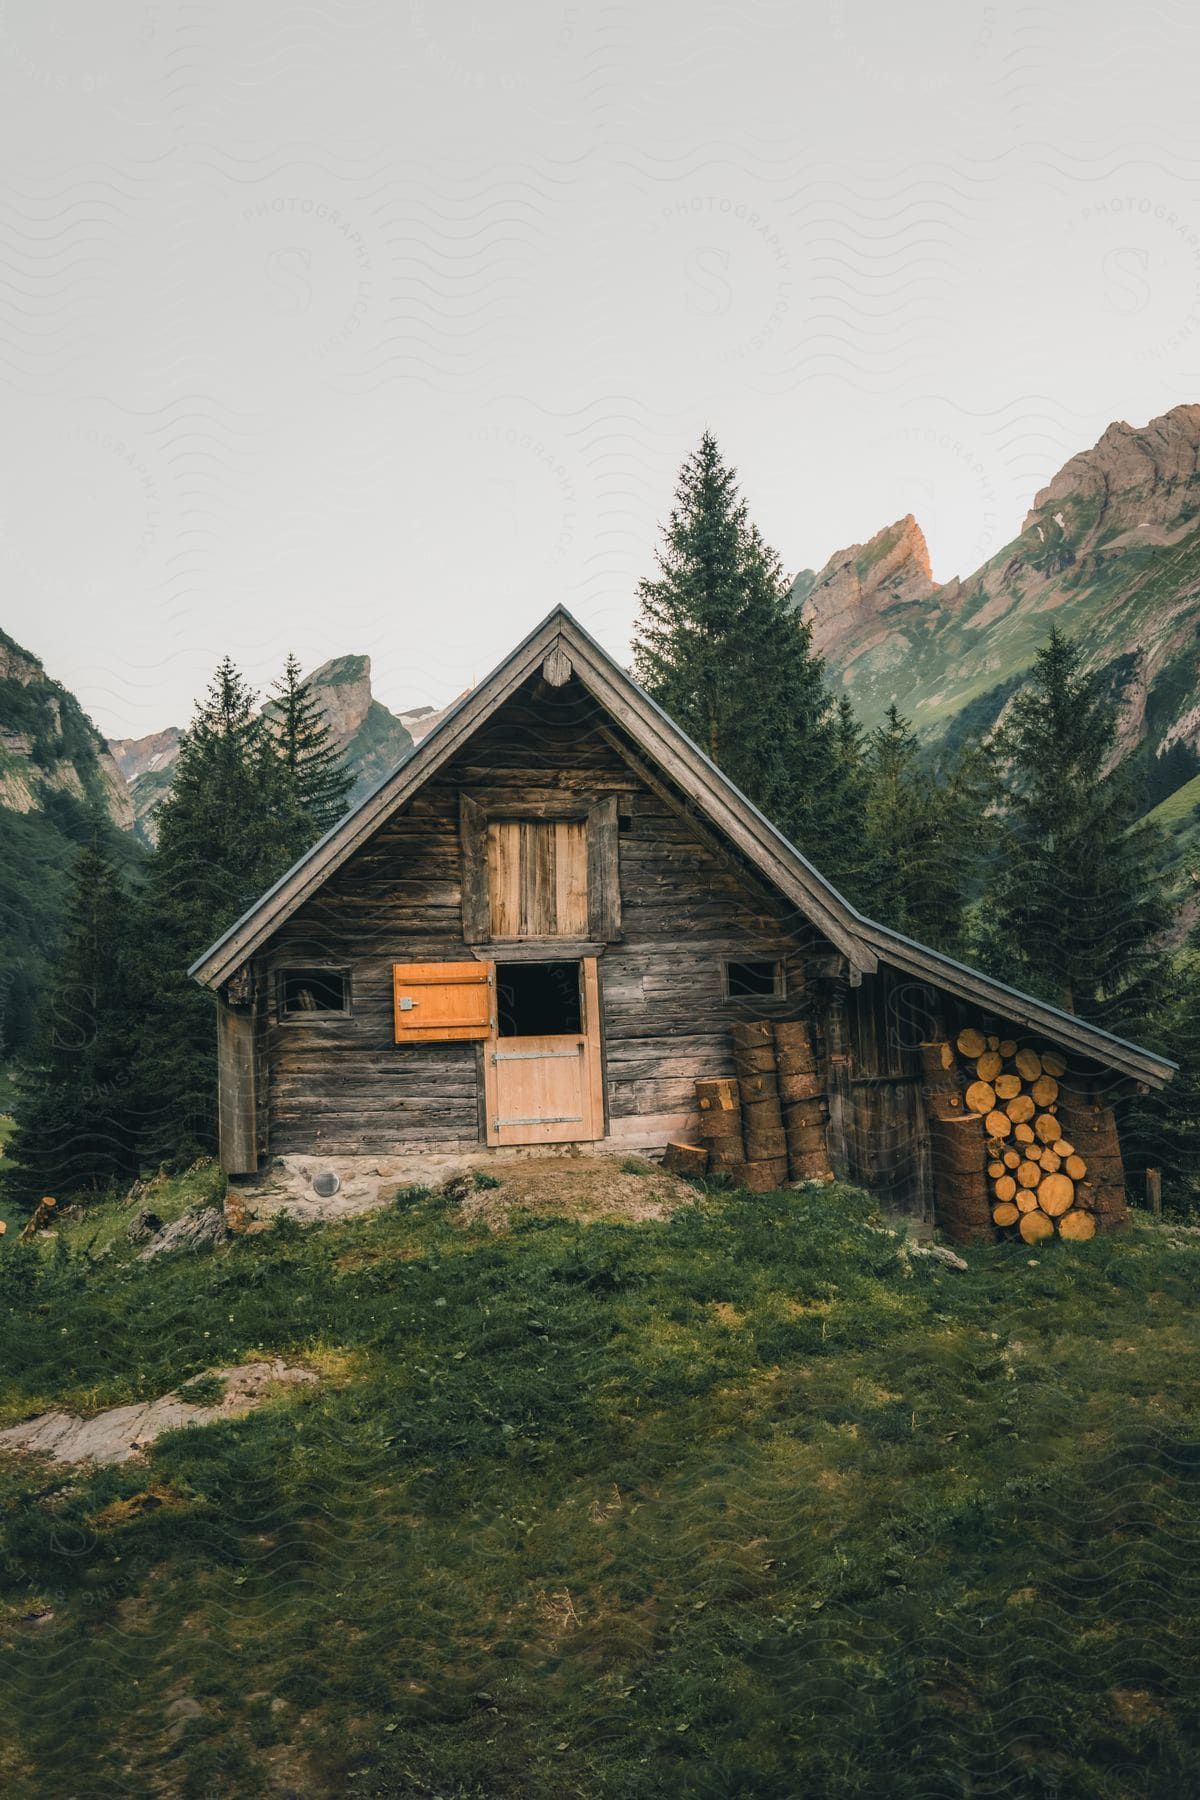 A wooden cabin in the middle of a forest with mountain range in the background.